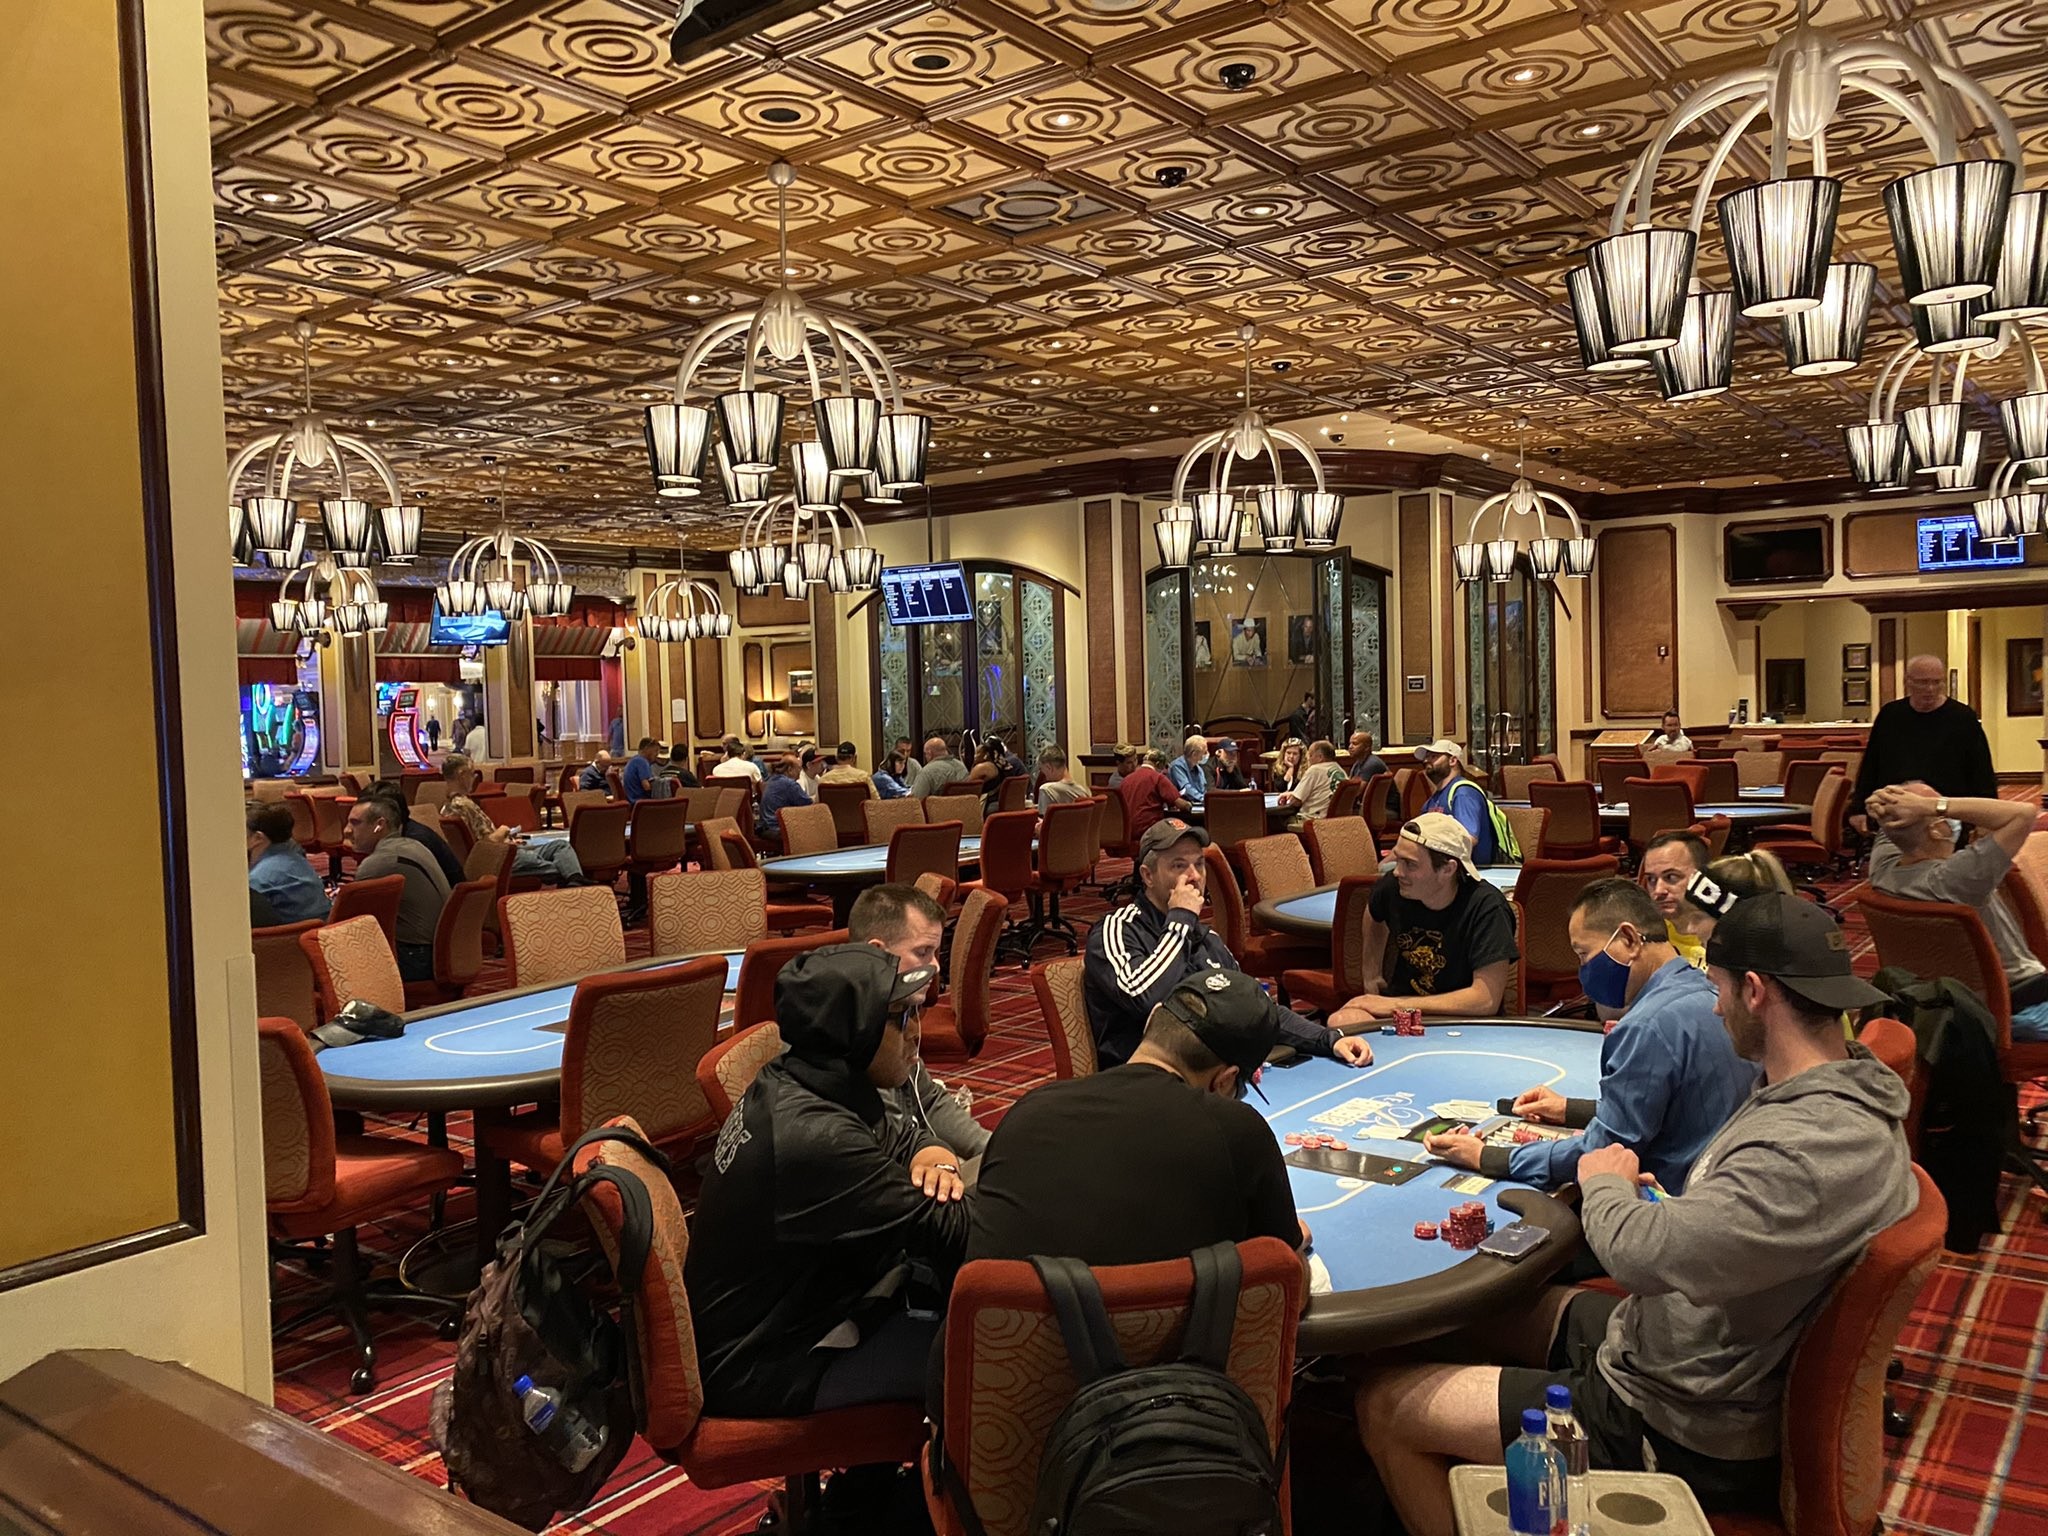 Bellagio Poker Room Review: Is It Worth Your Rake?